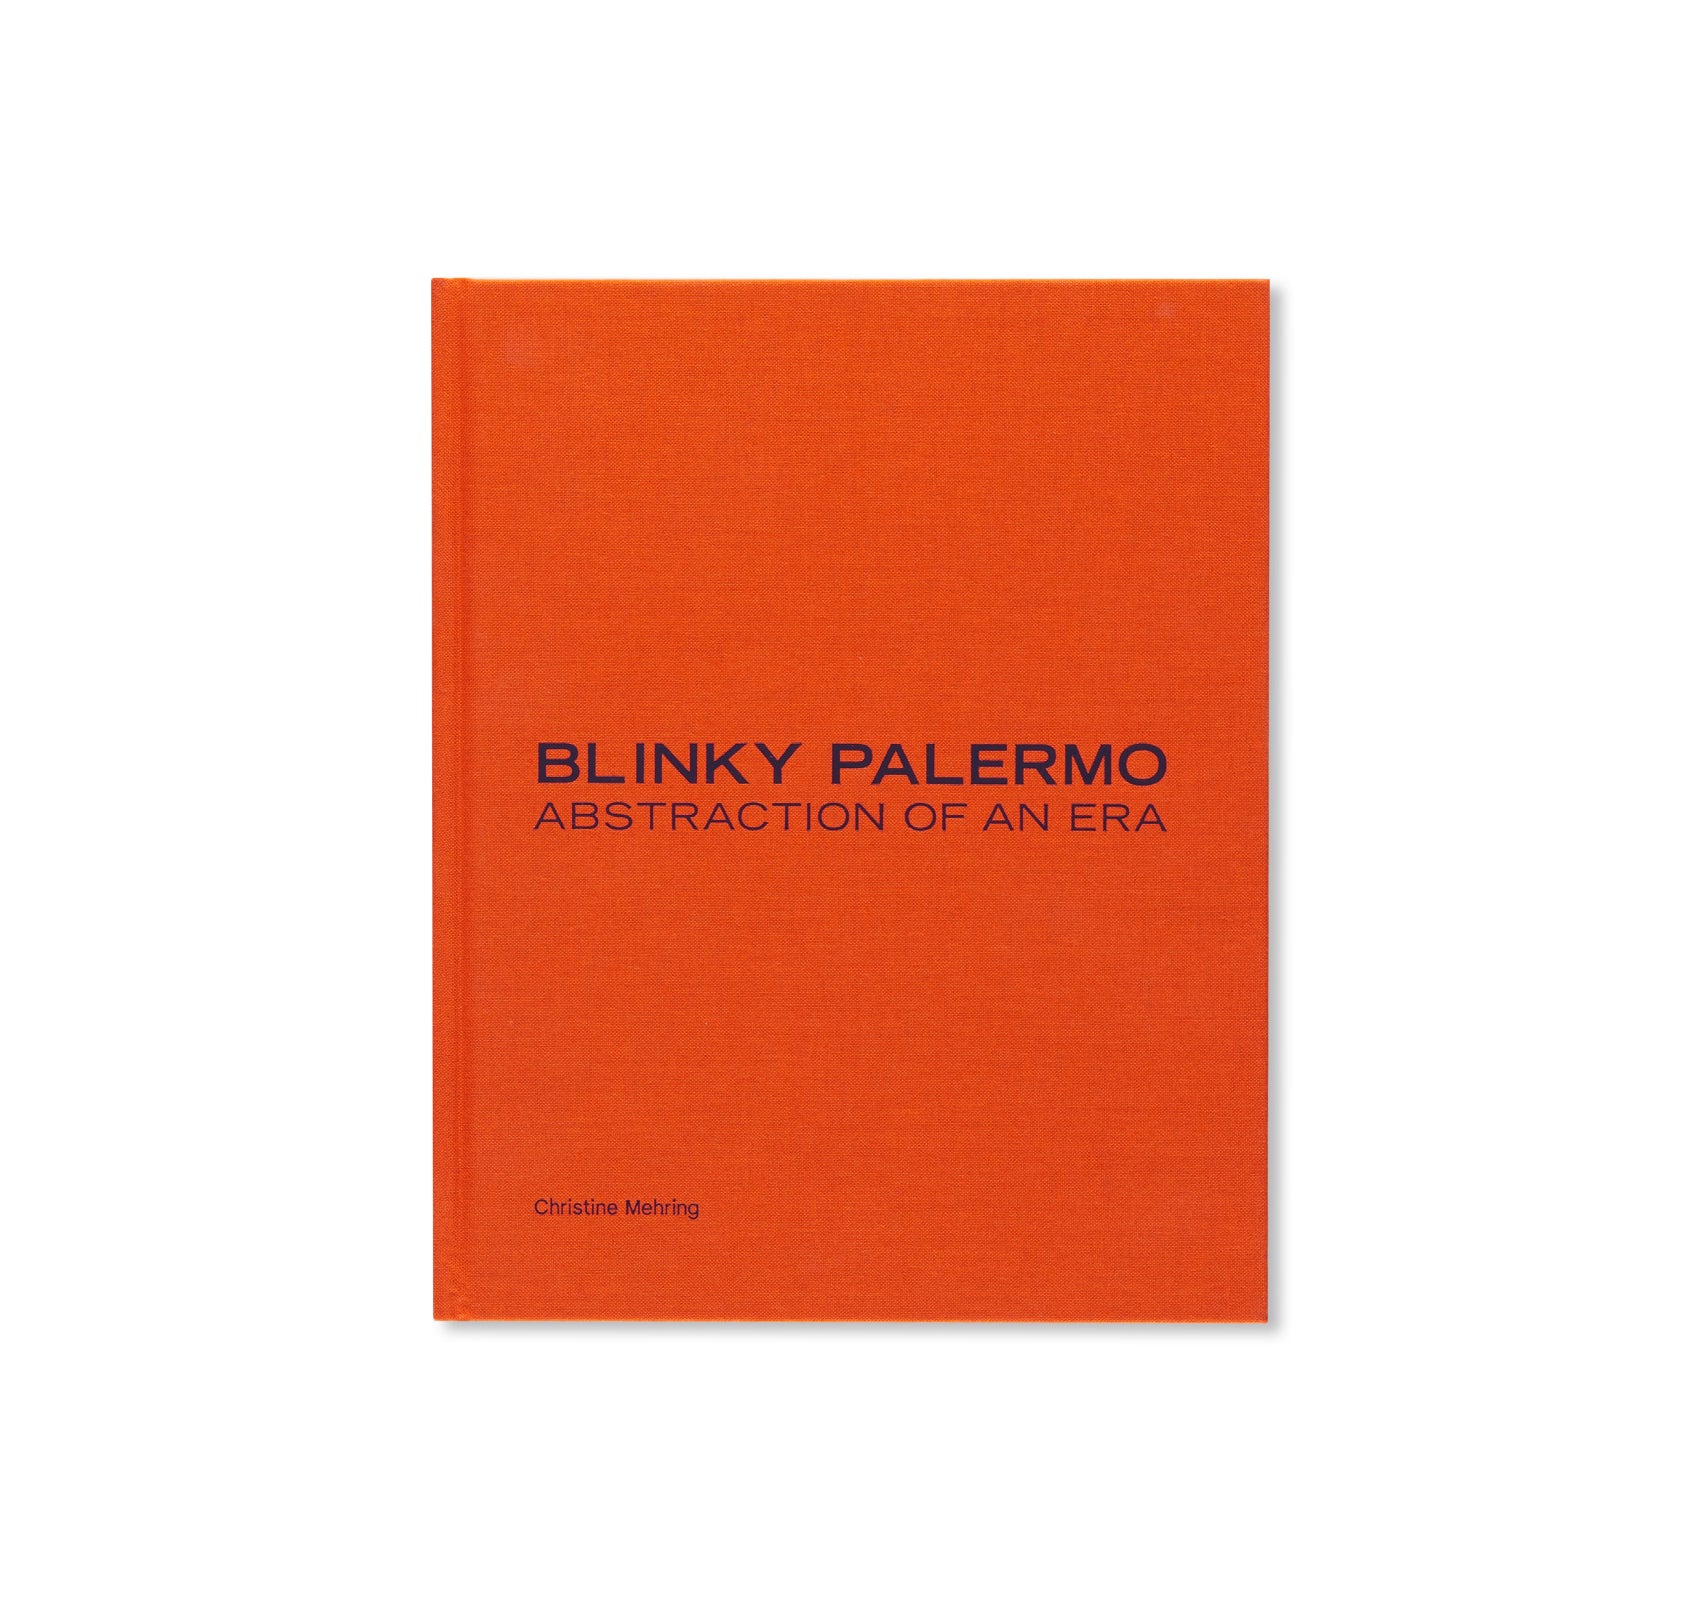 ABSTRACTION OF AN ERA by Blinky Palermo